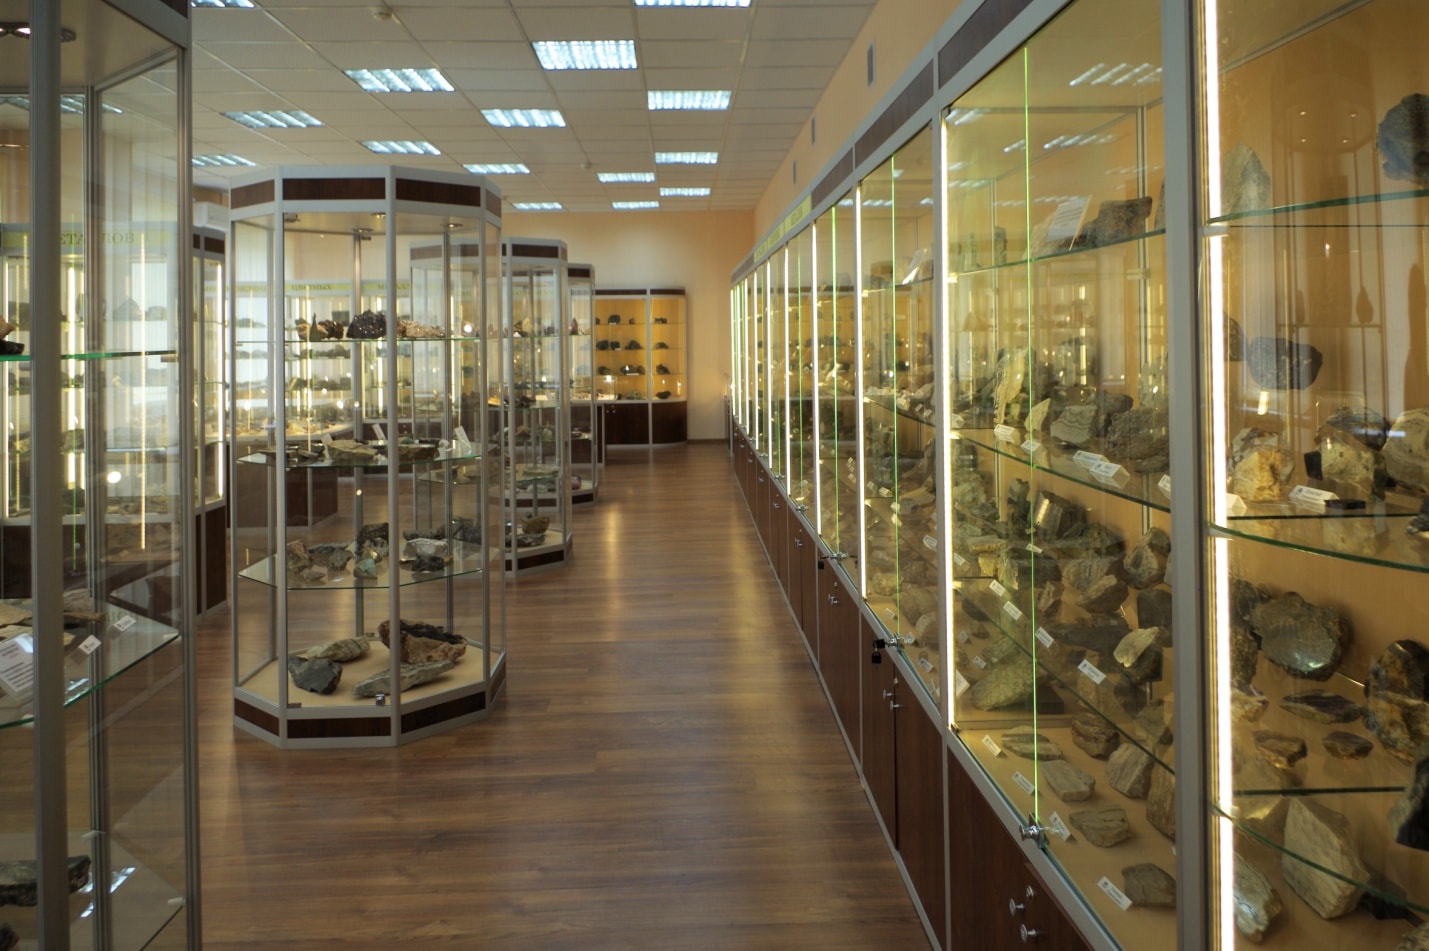 New exposition of the Museum “Ores of Precious and base metals and diamonds”, TsNIGRI, 2018.